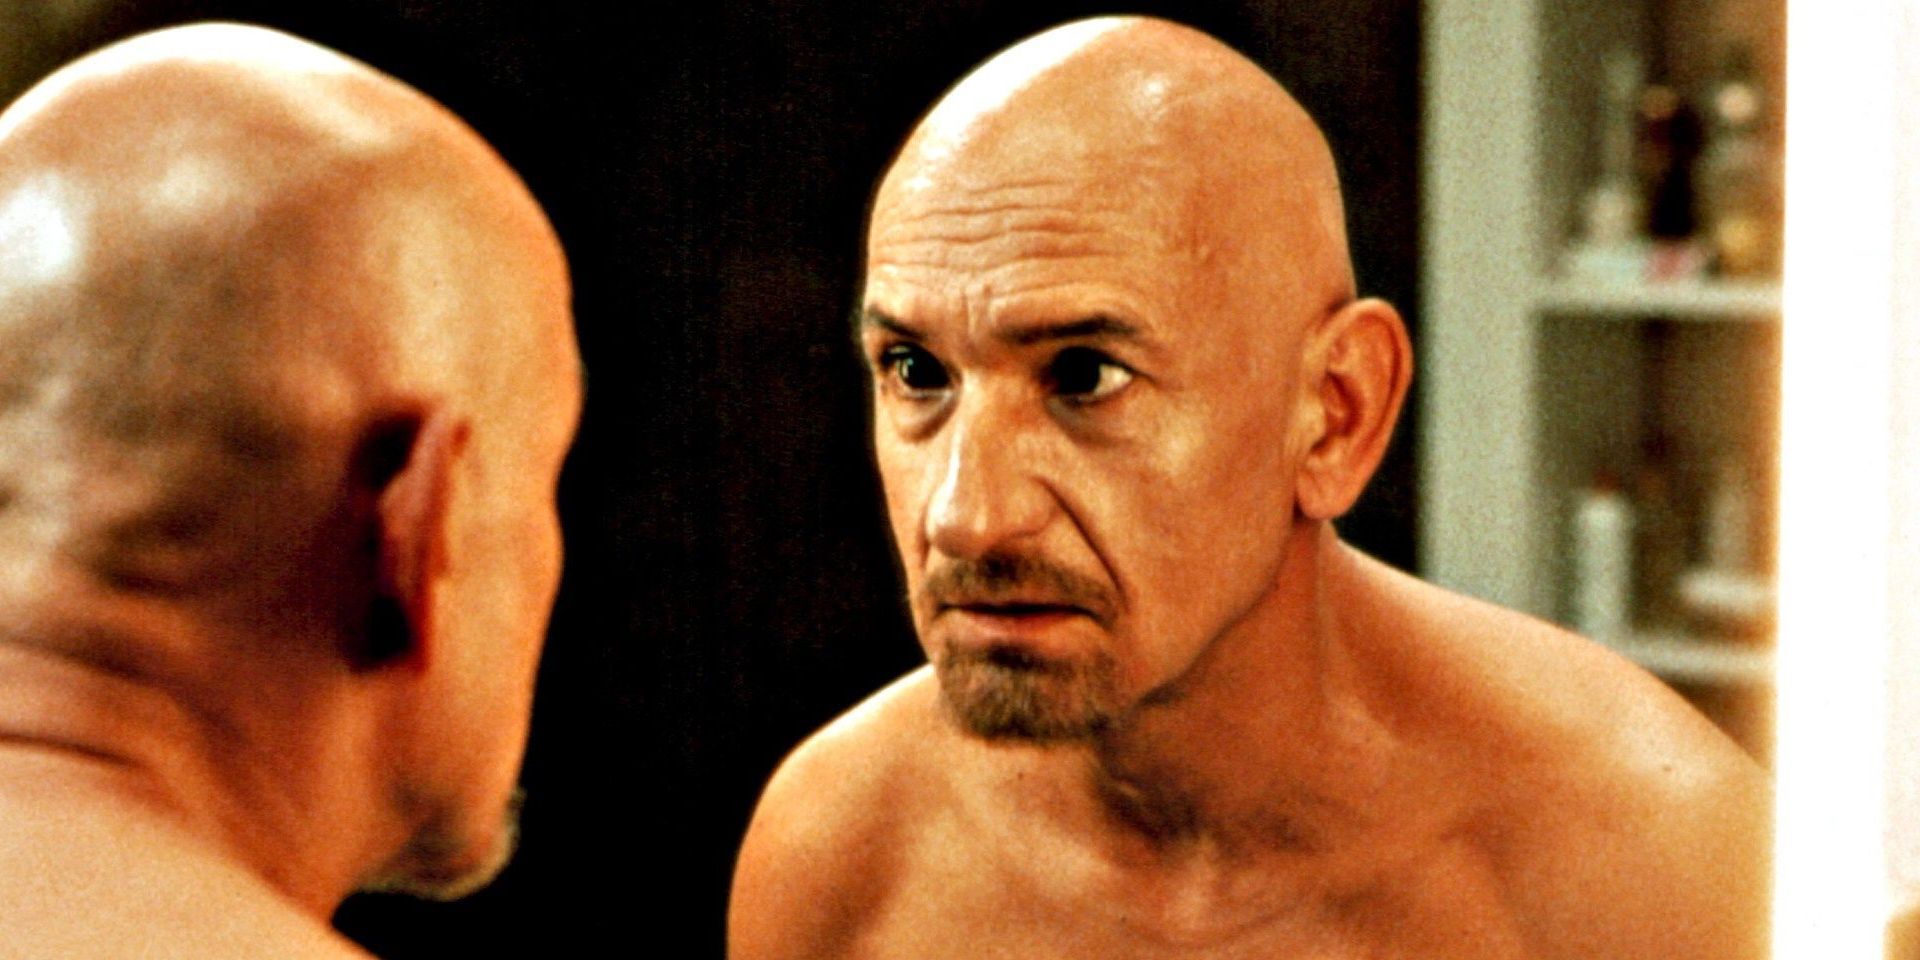 Ben Kingsley’s 10 Best Movies, According To Rotten Tomatoes